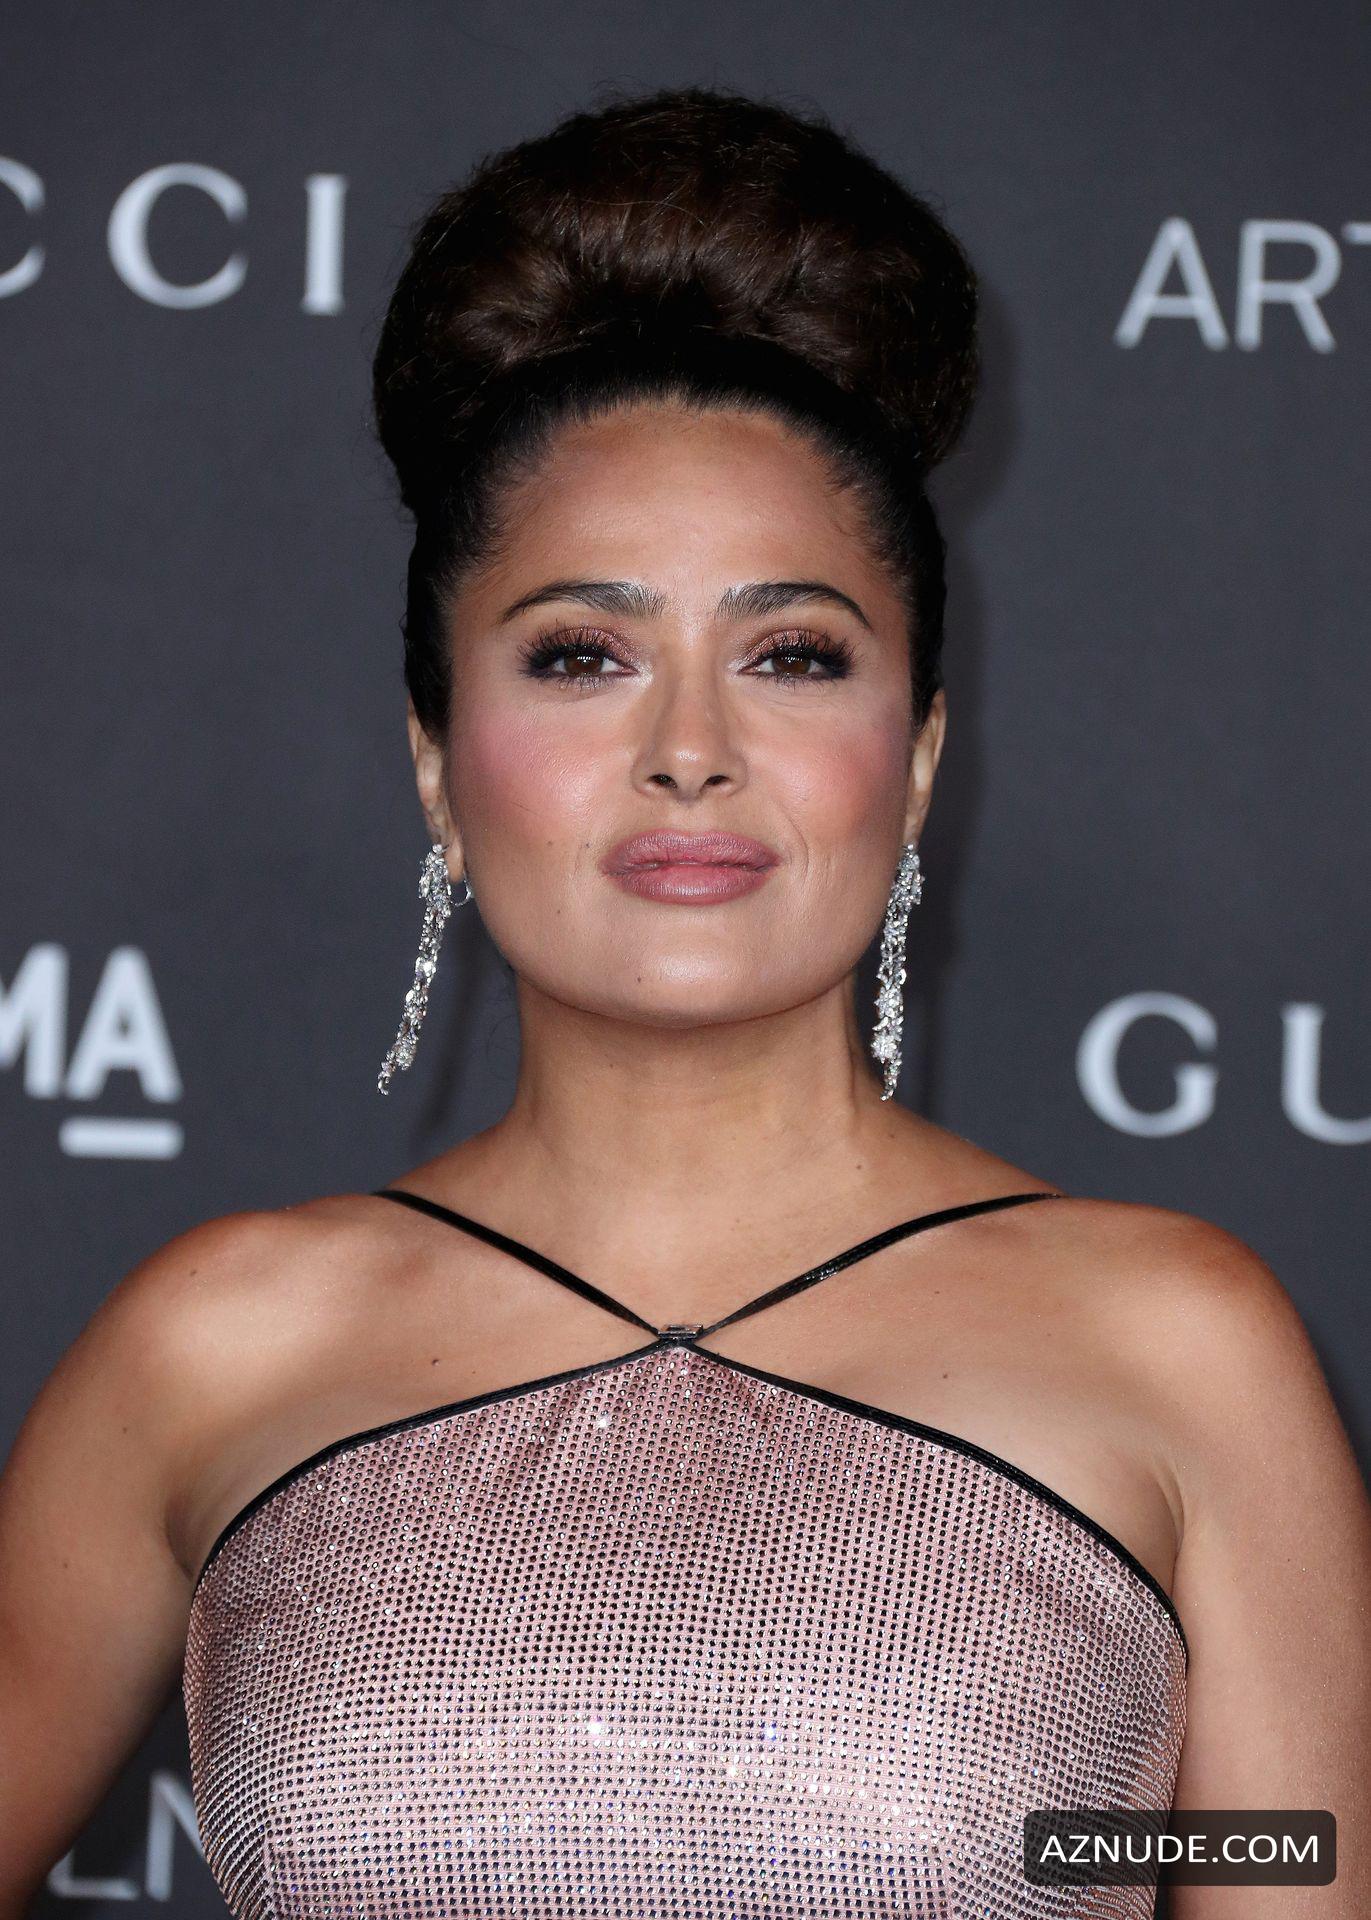 Salma Hayek Sexy Arrives At The 2019 Lacma Art And Film